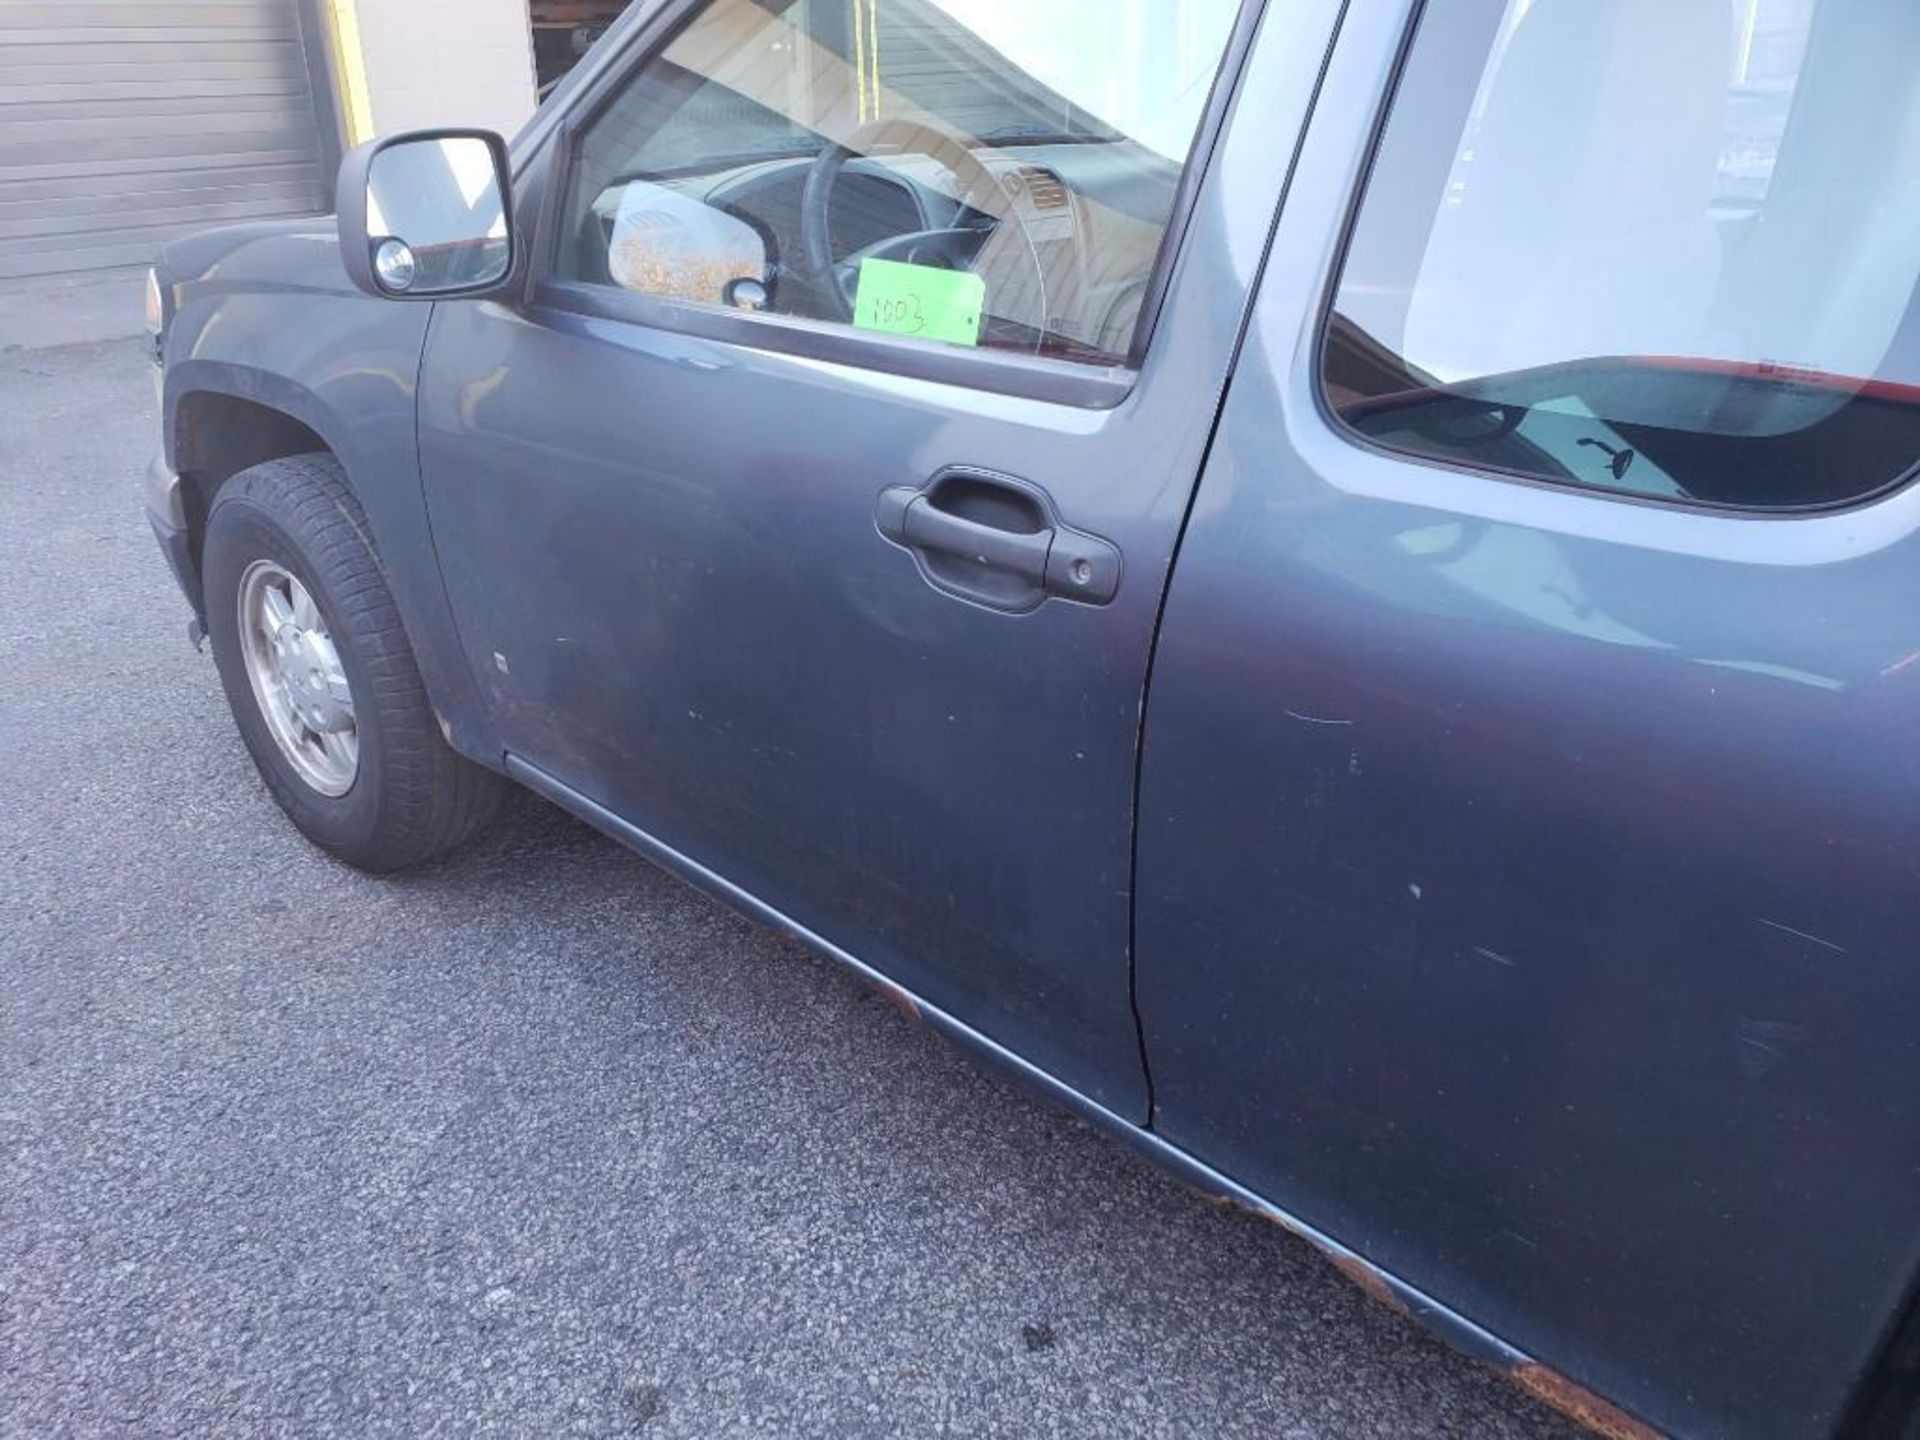 2006 Chevrolet Colorado. VIN 1GCCS196868135452. Frame has rust and one hole can be seen. - Image 4 of 25